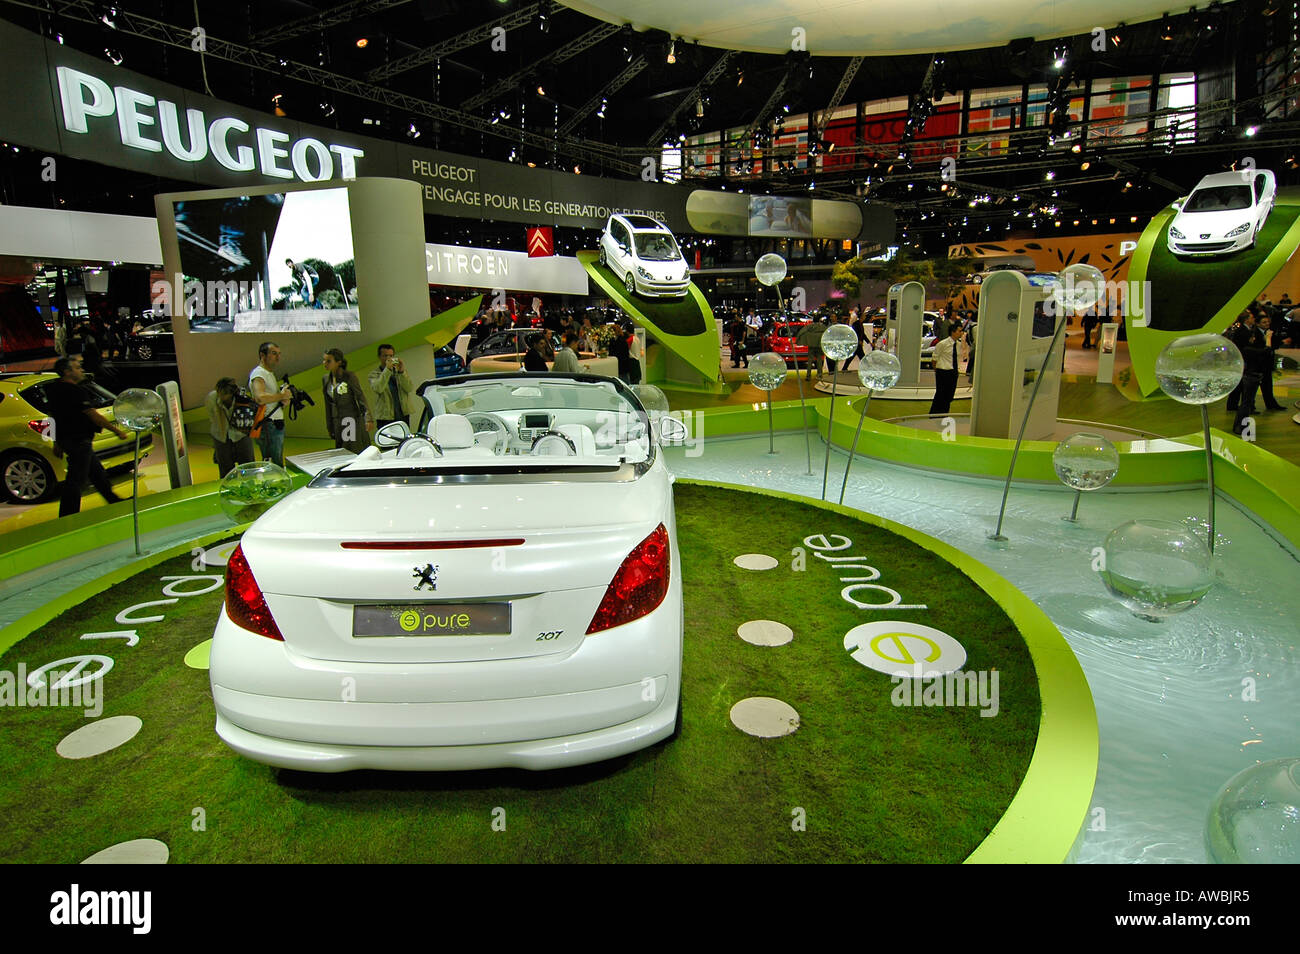 Overview of the Peugeot stand at the 2006 Paris World Car Exhibition Stock Photo